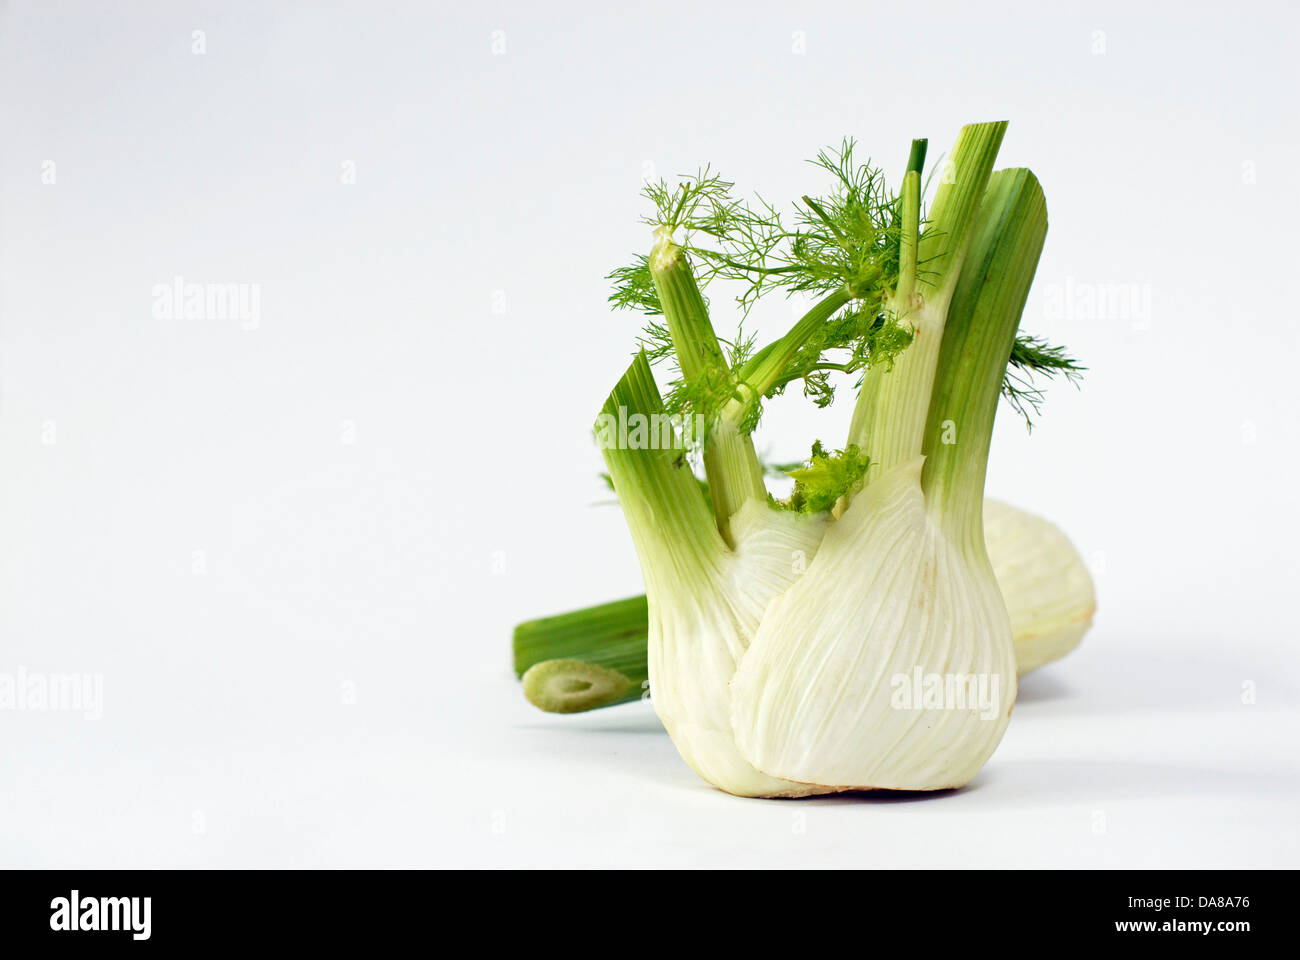 A bulb of fennel Stock Photo